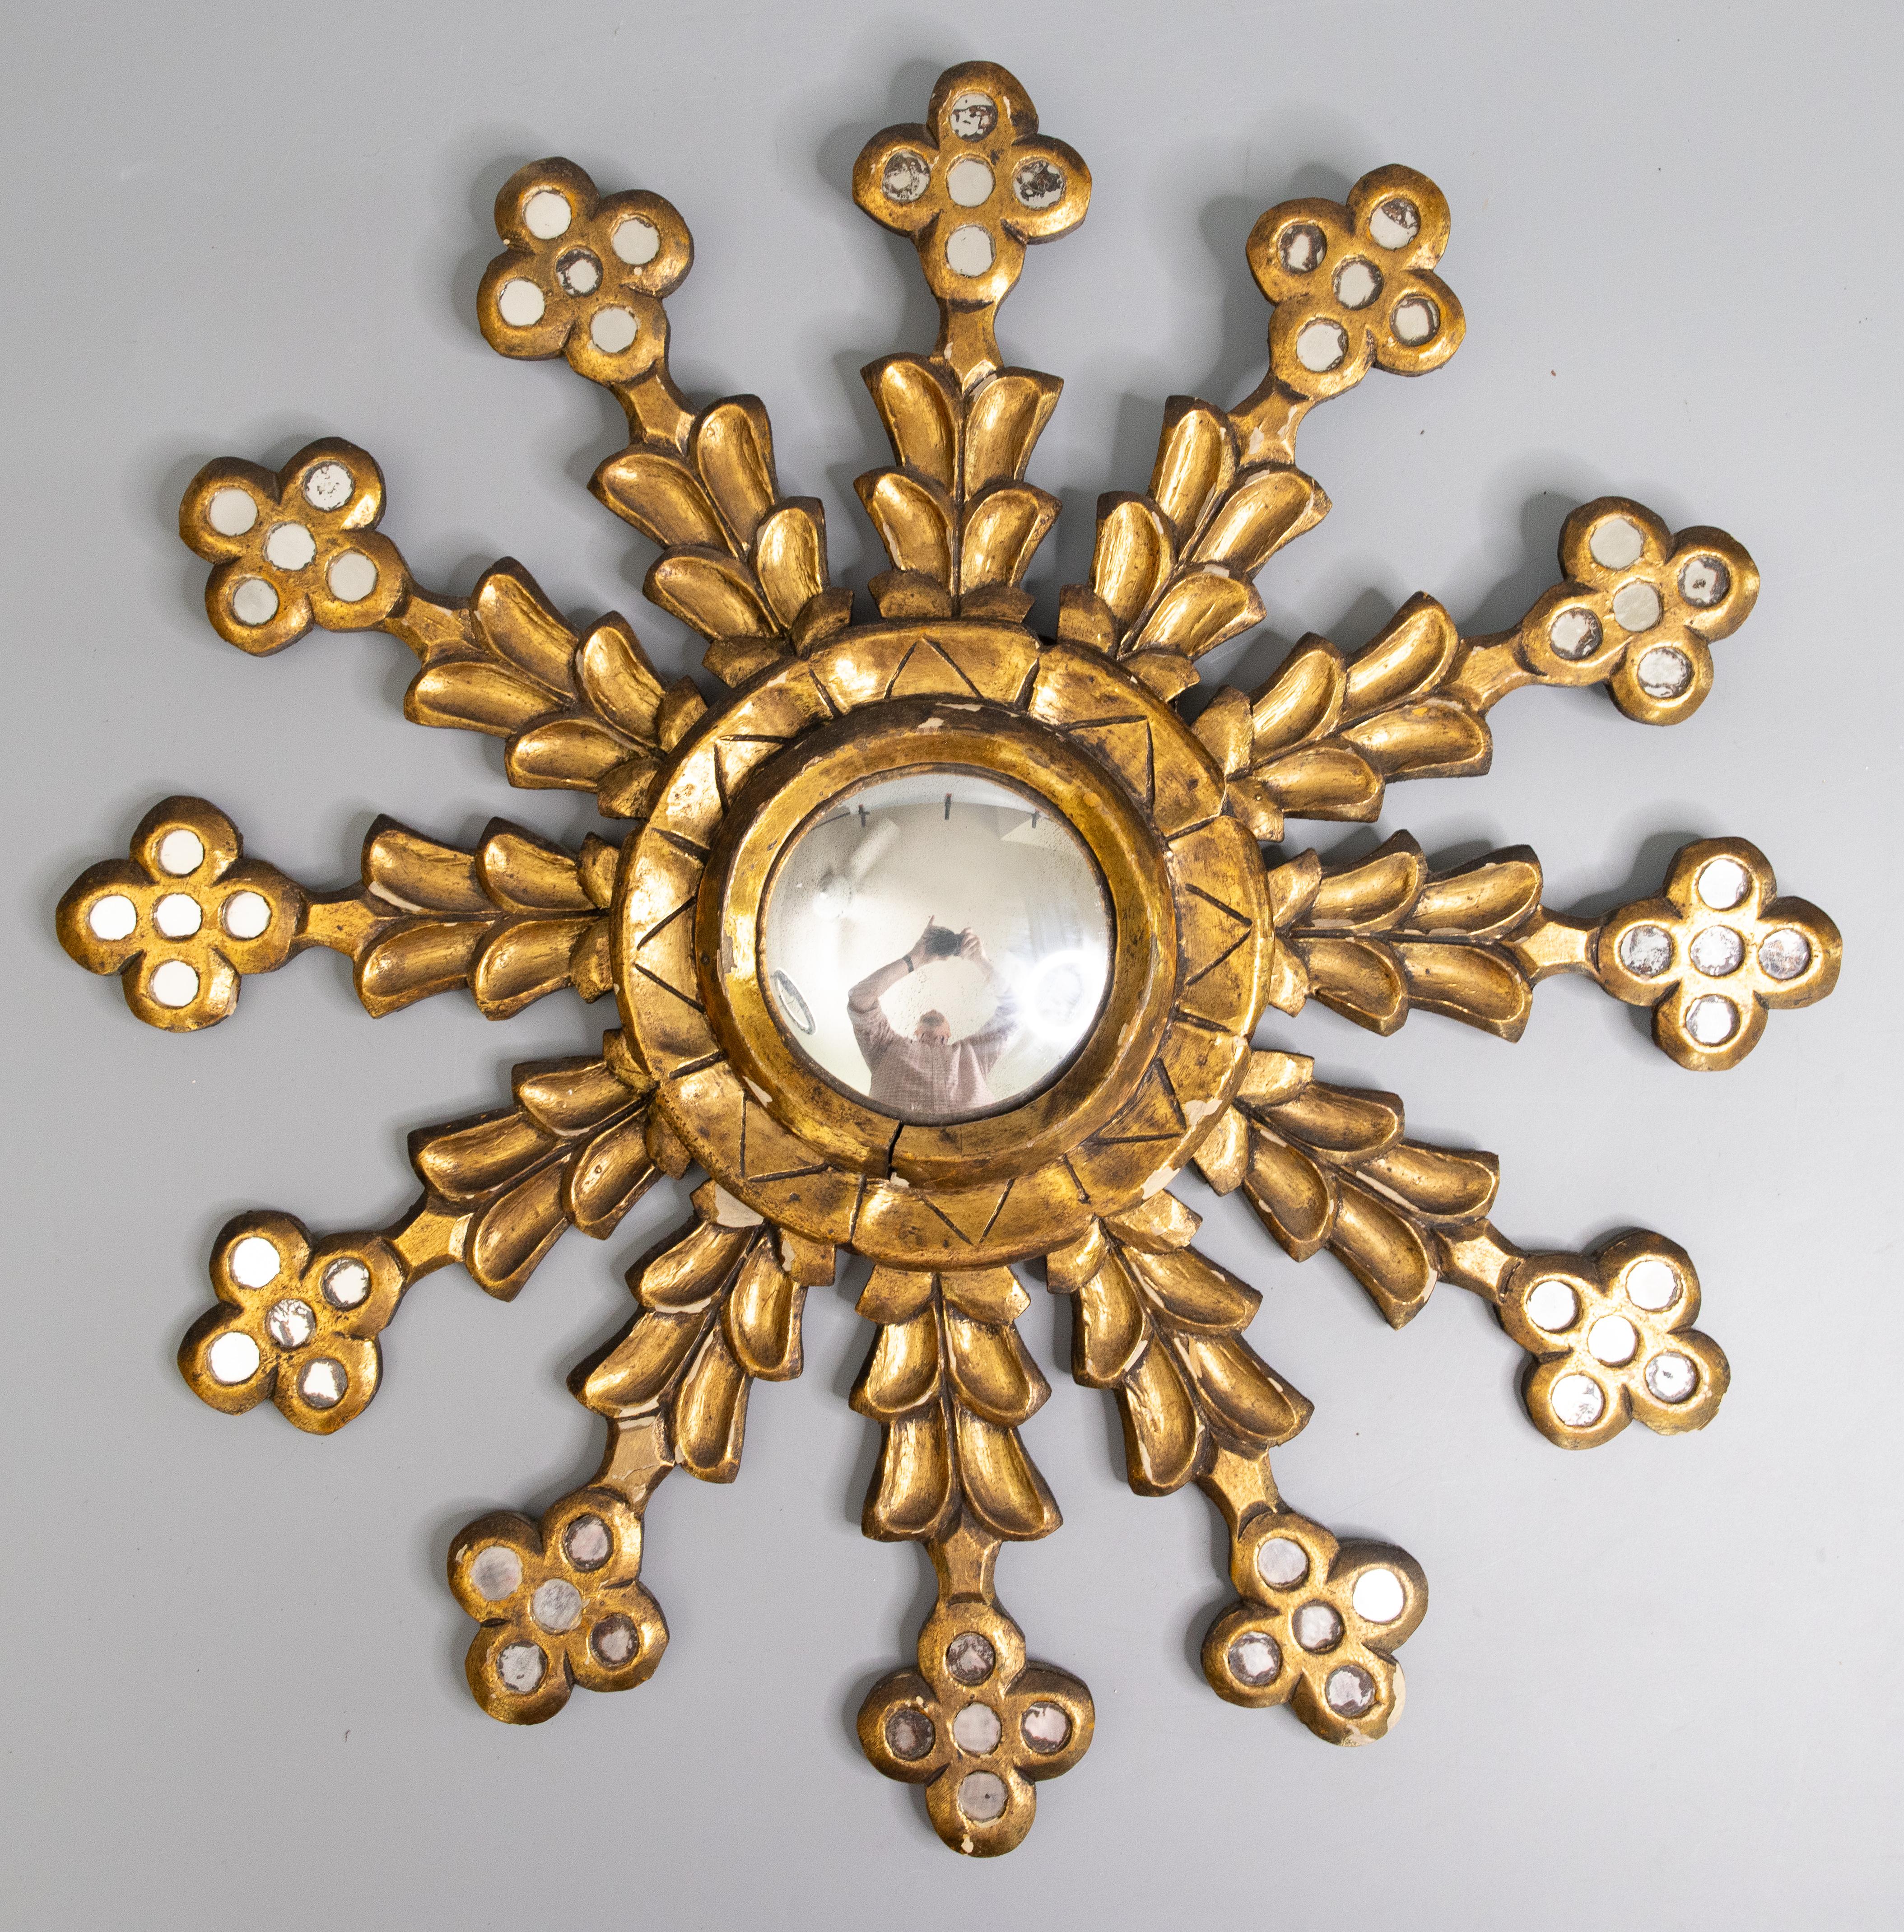 A rare beautifully carved antique early 20th-Century French gilt wood and gesso sunburst / starburst mirror with the original convex mirror glass. This stunning mirror has a lovely snowflake design, aged gilt patina, finely carved mirrored rays, and